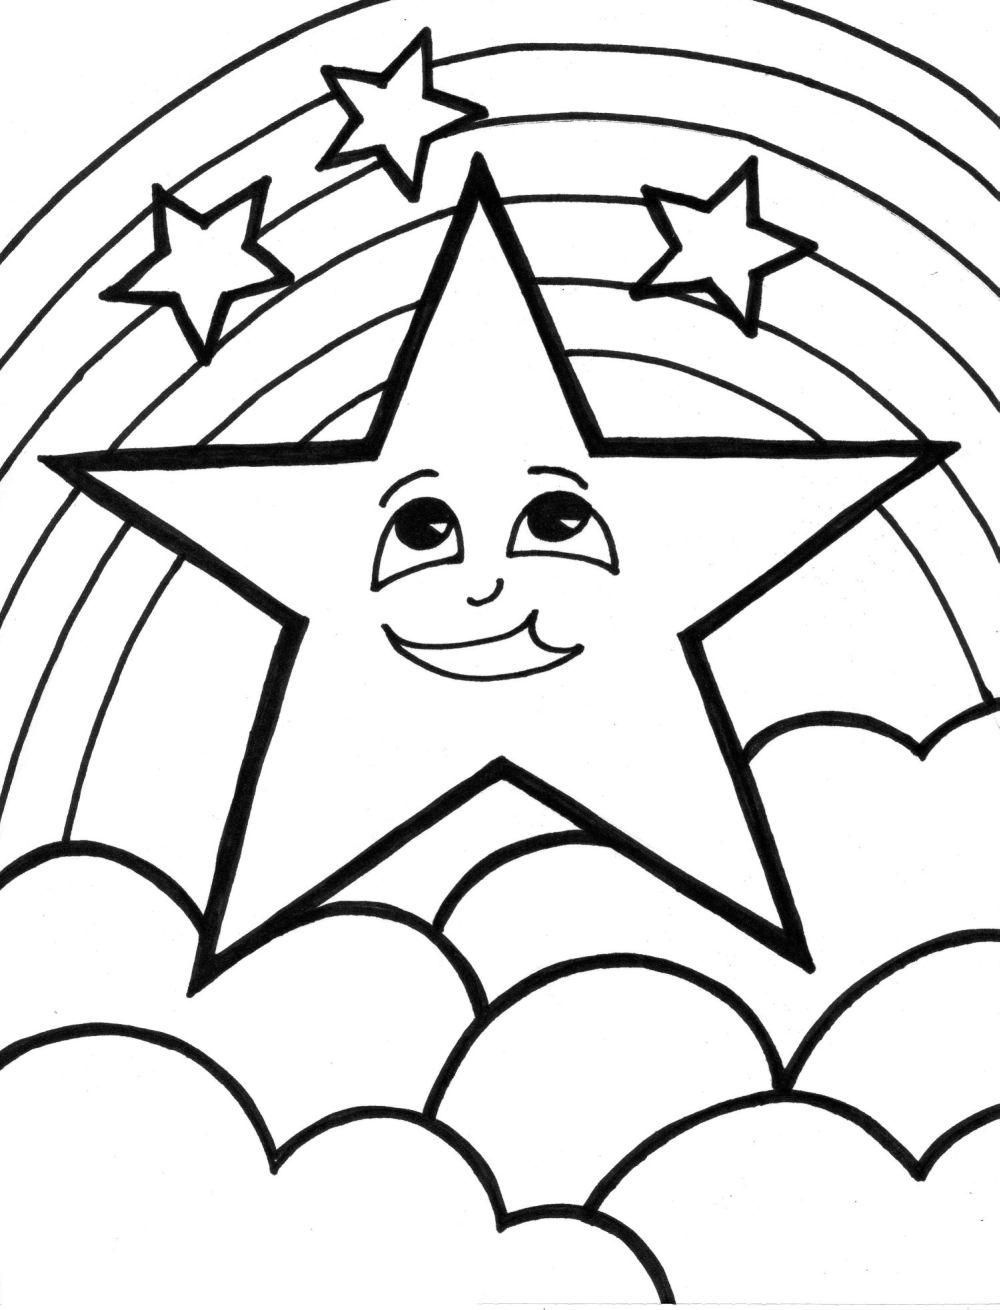 Free Printable Star Coloring Pages For Kids | Birthday Party Ideas - Free Printable Christmas Star Coloring Pages